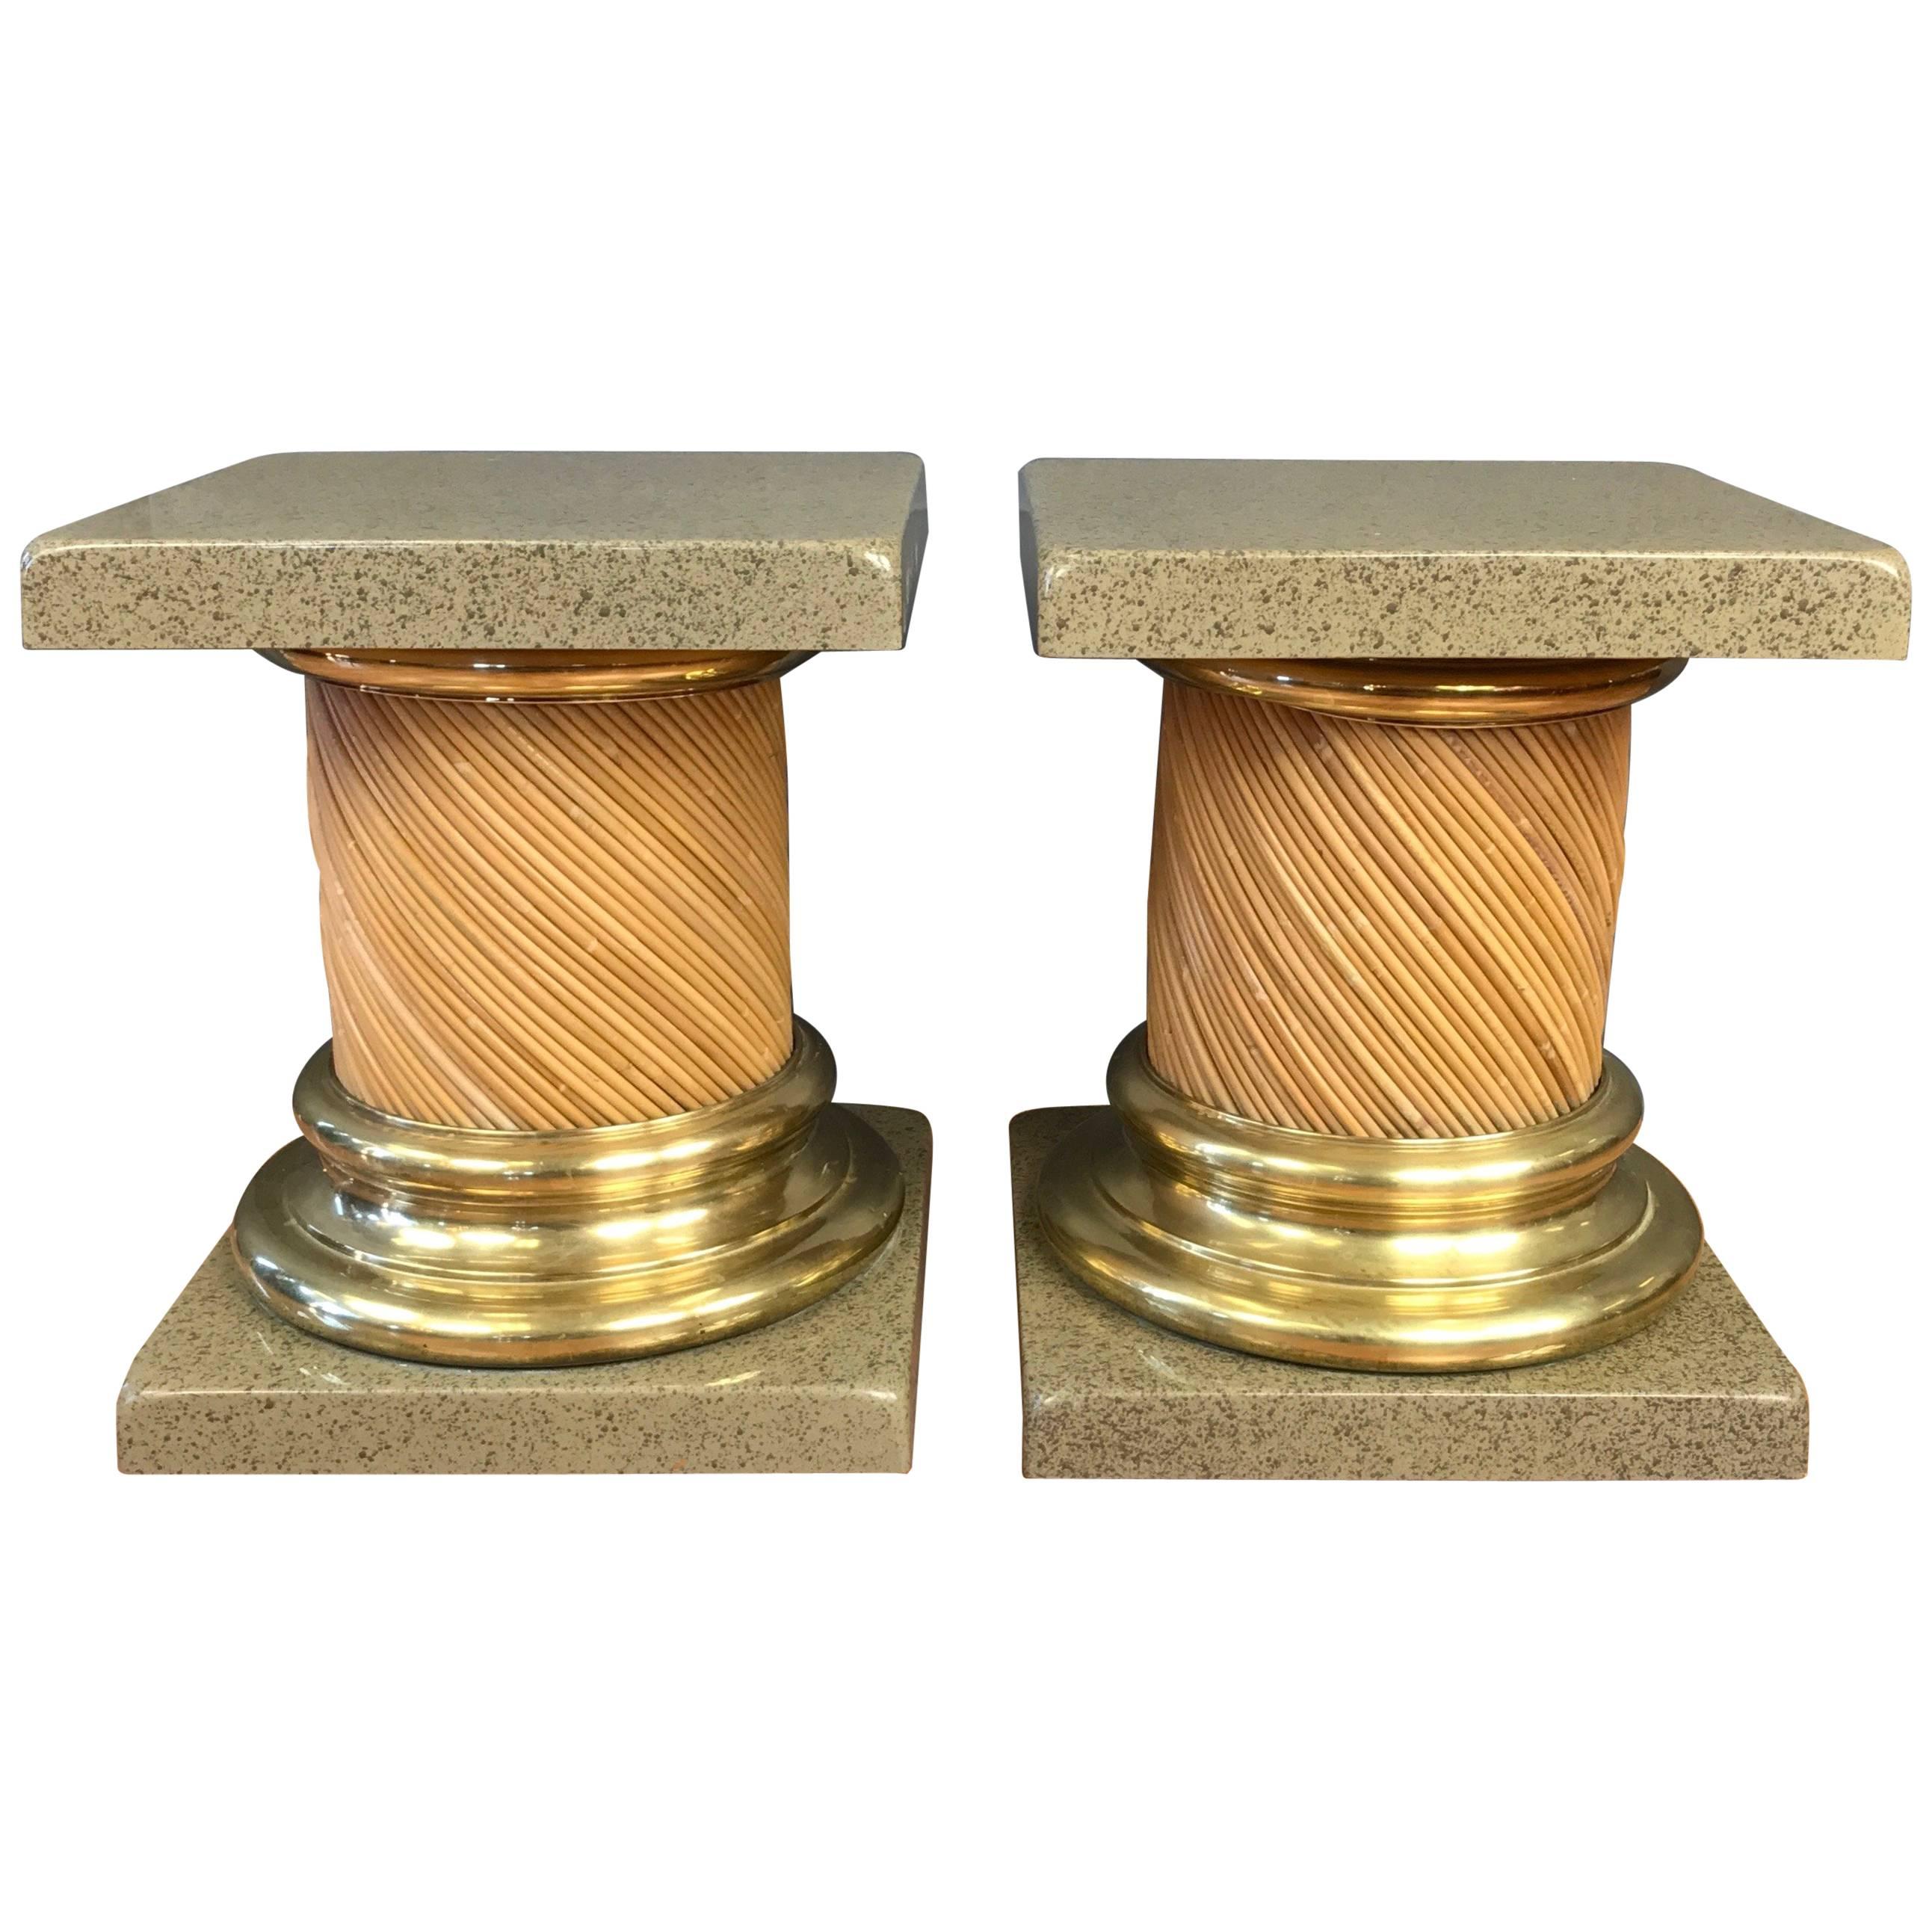 Pair of Lacquered-Top Reed and Brass Columnar End Tables